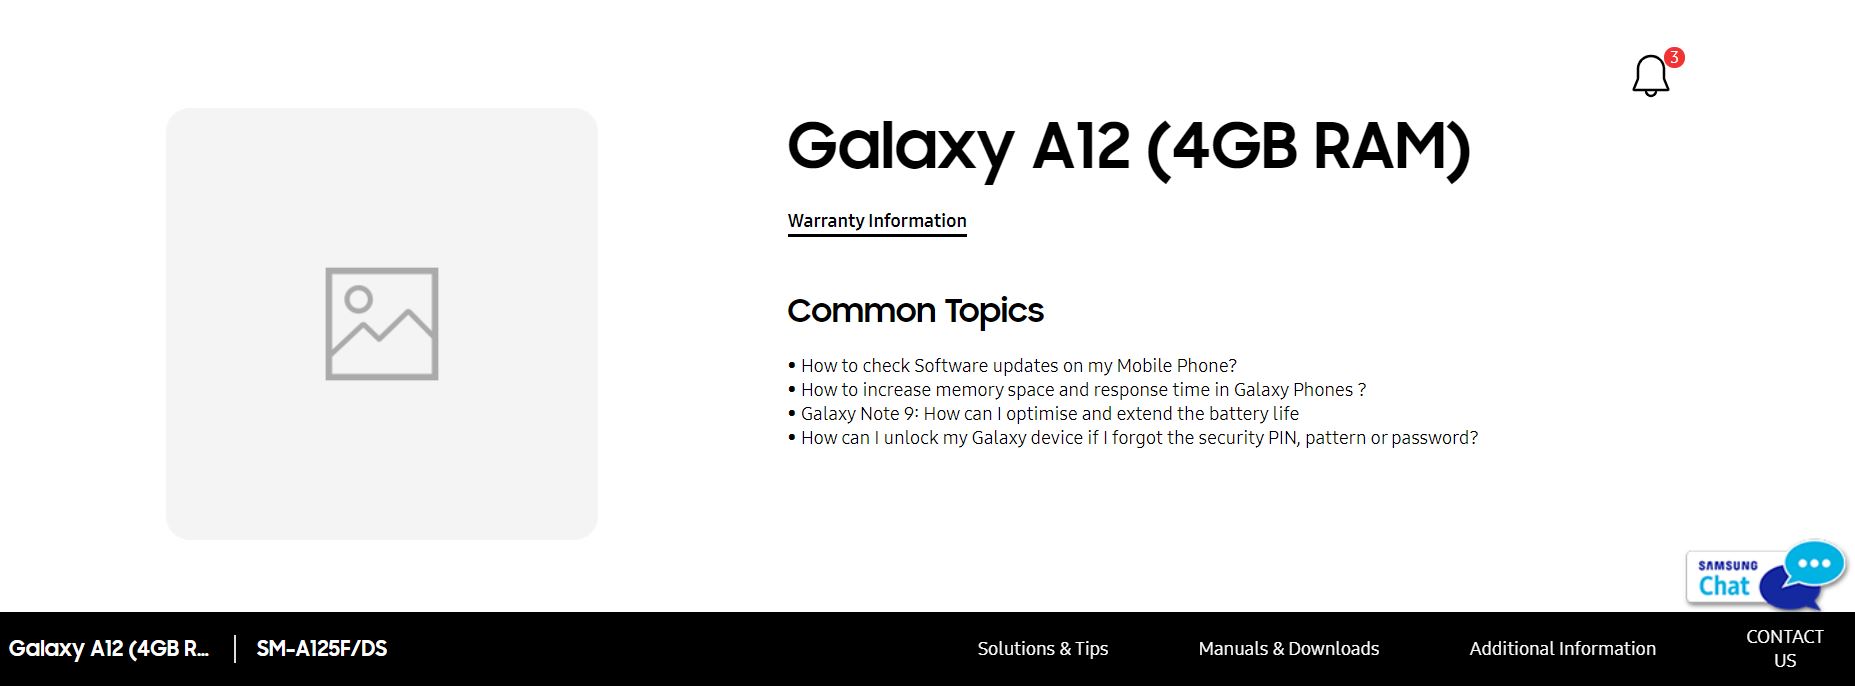 Galaxy A 12 Support Page